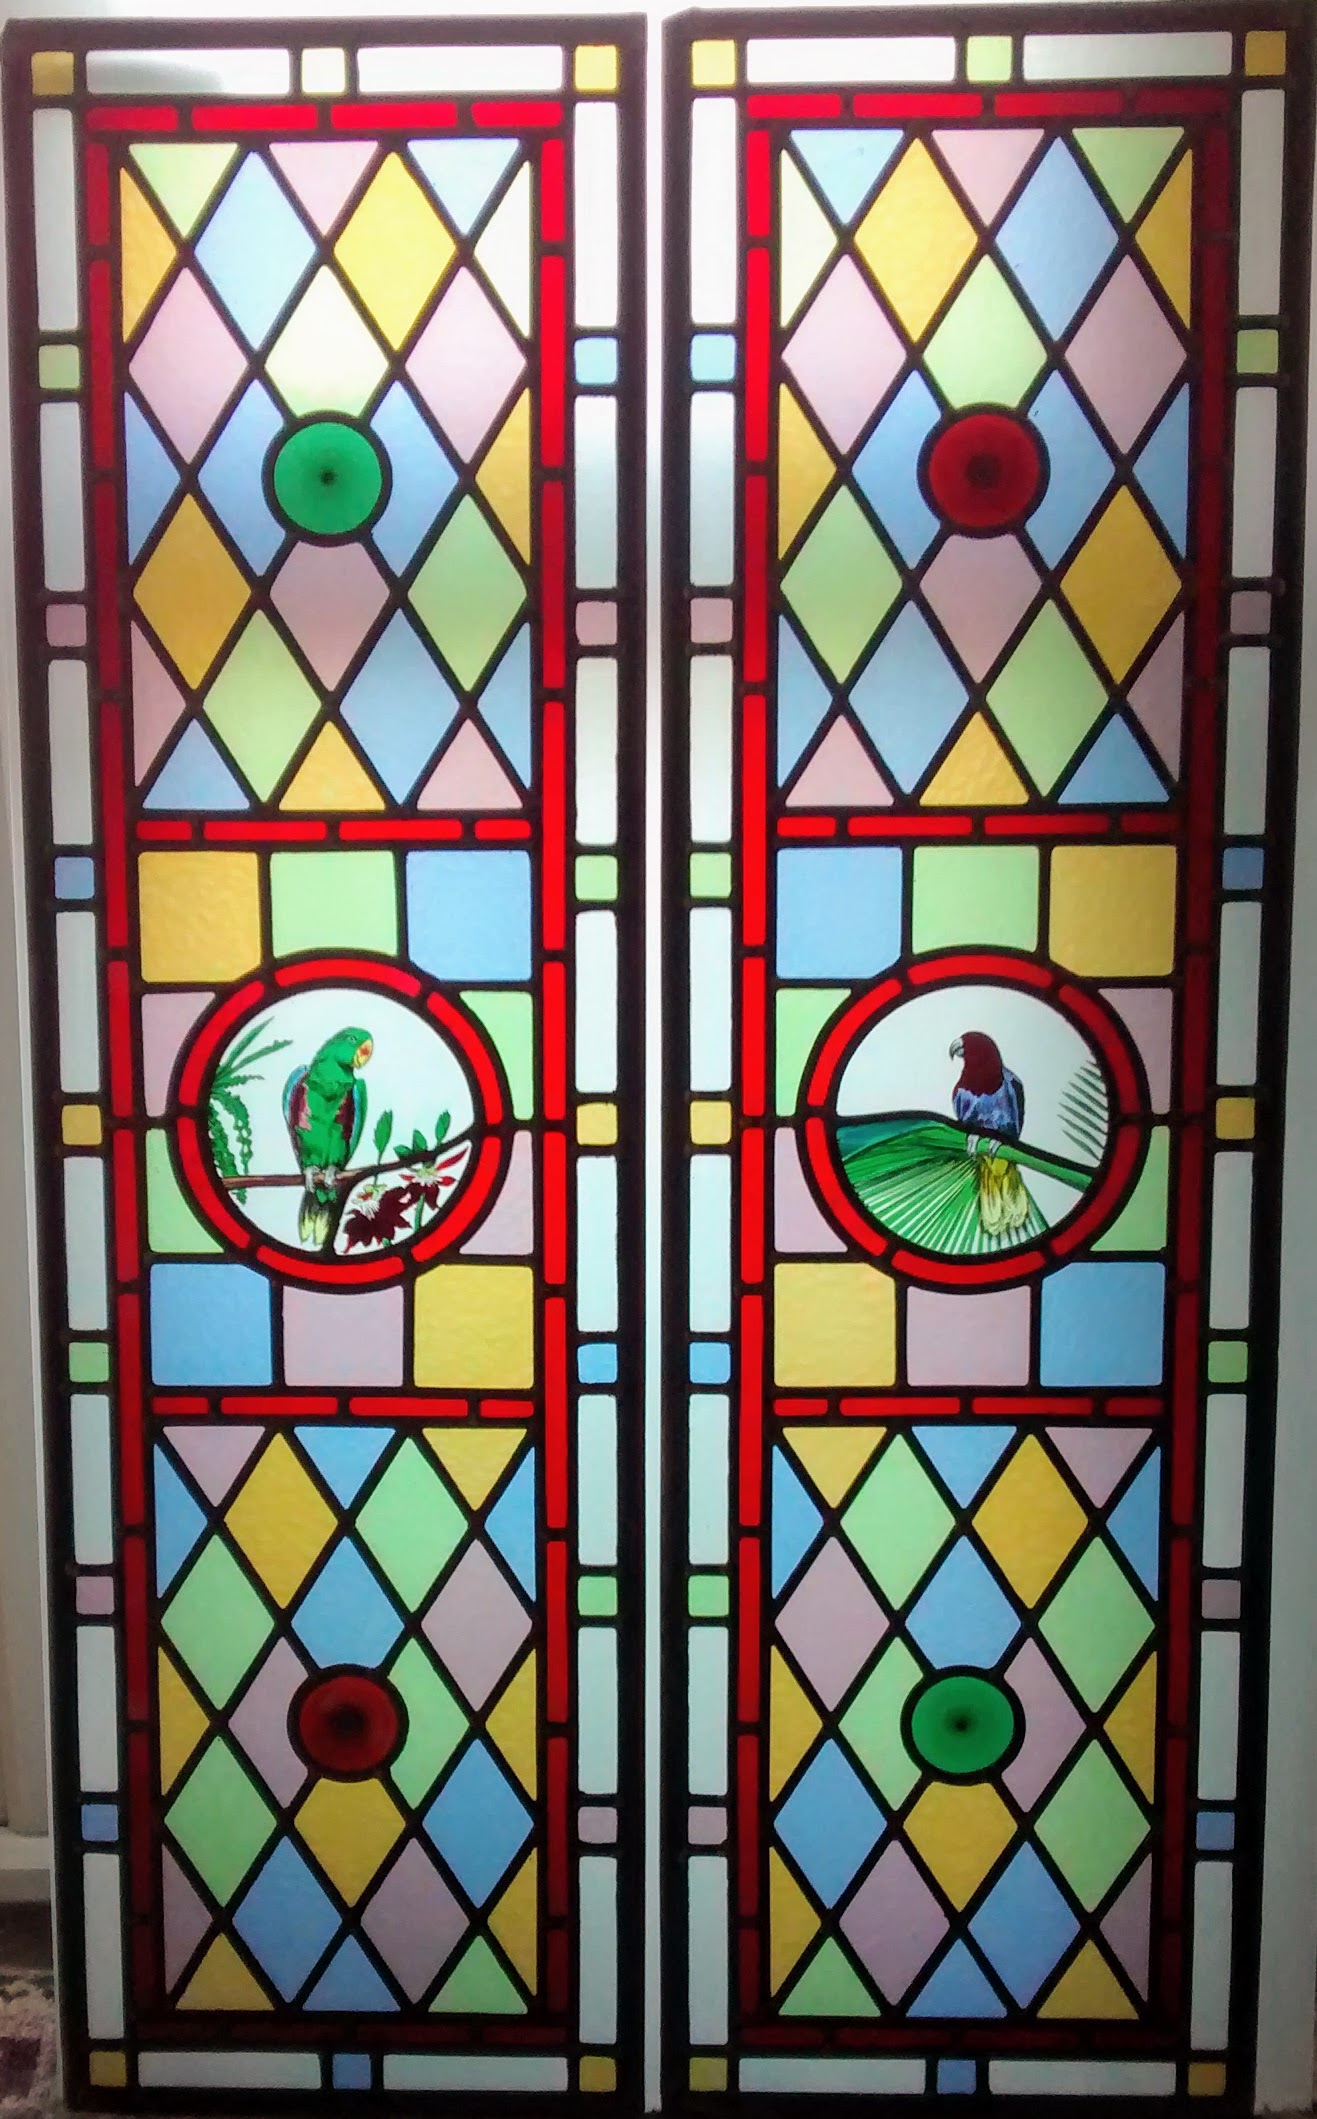 VIctorian style stained glass gallery